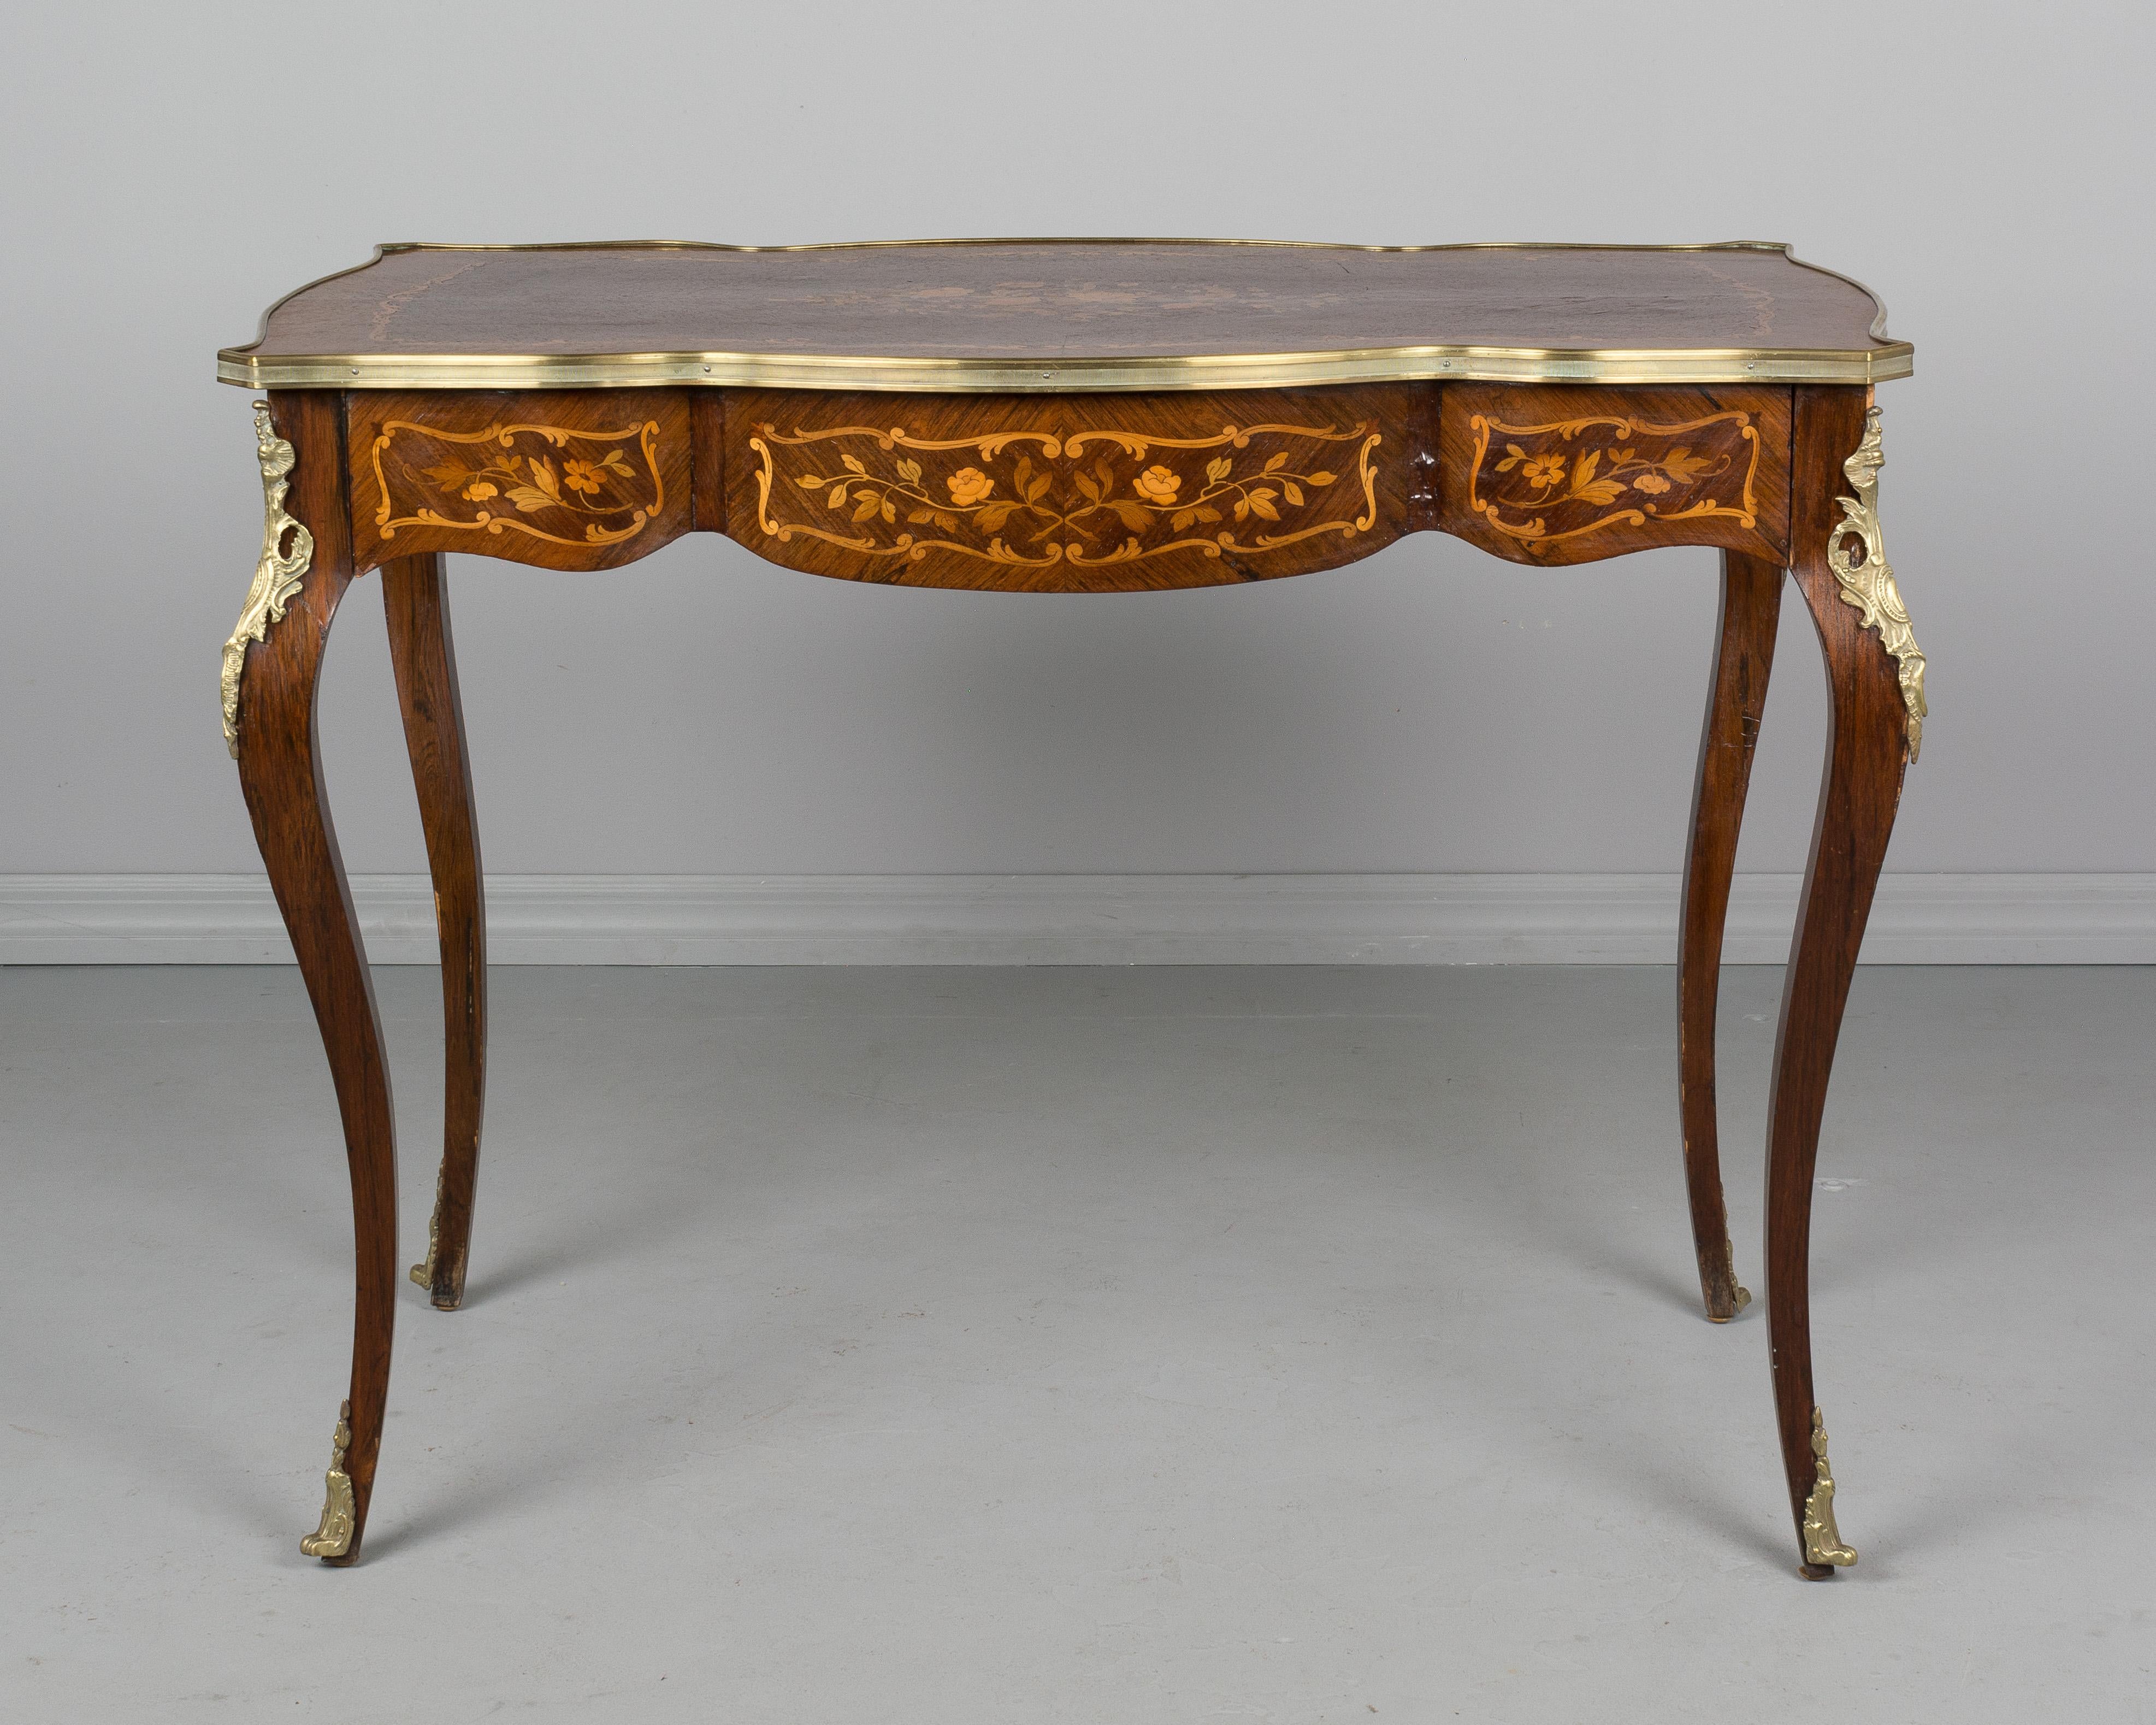 An early 20th century Louis XV style marquetry, bronze-mounted desk with a large dovetailed drawer. Finished on all four sides with fine floral motif inlay of mahogany. Elegant slender curved legs with bronze corner decorations and sabots. French